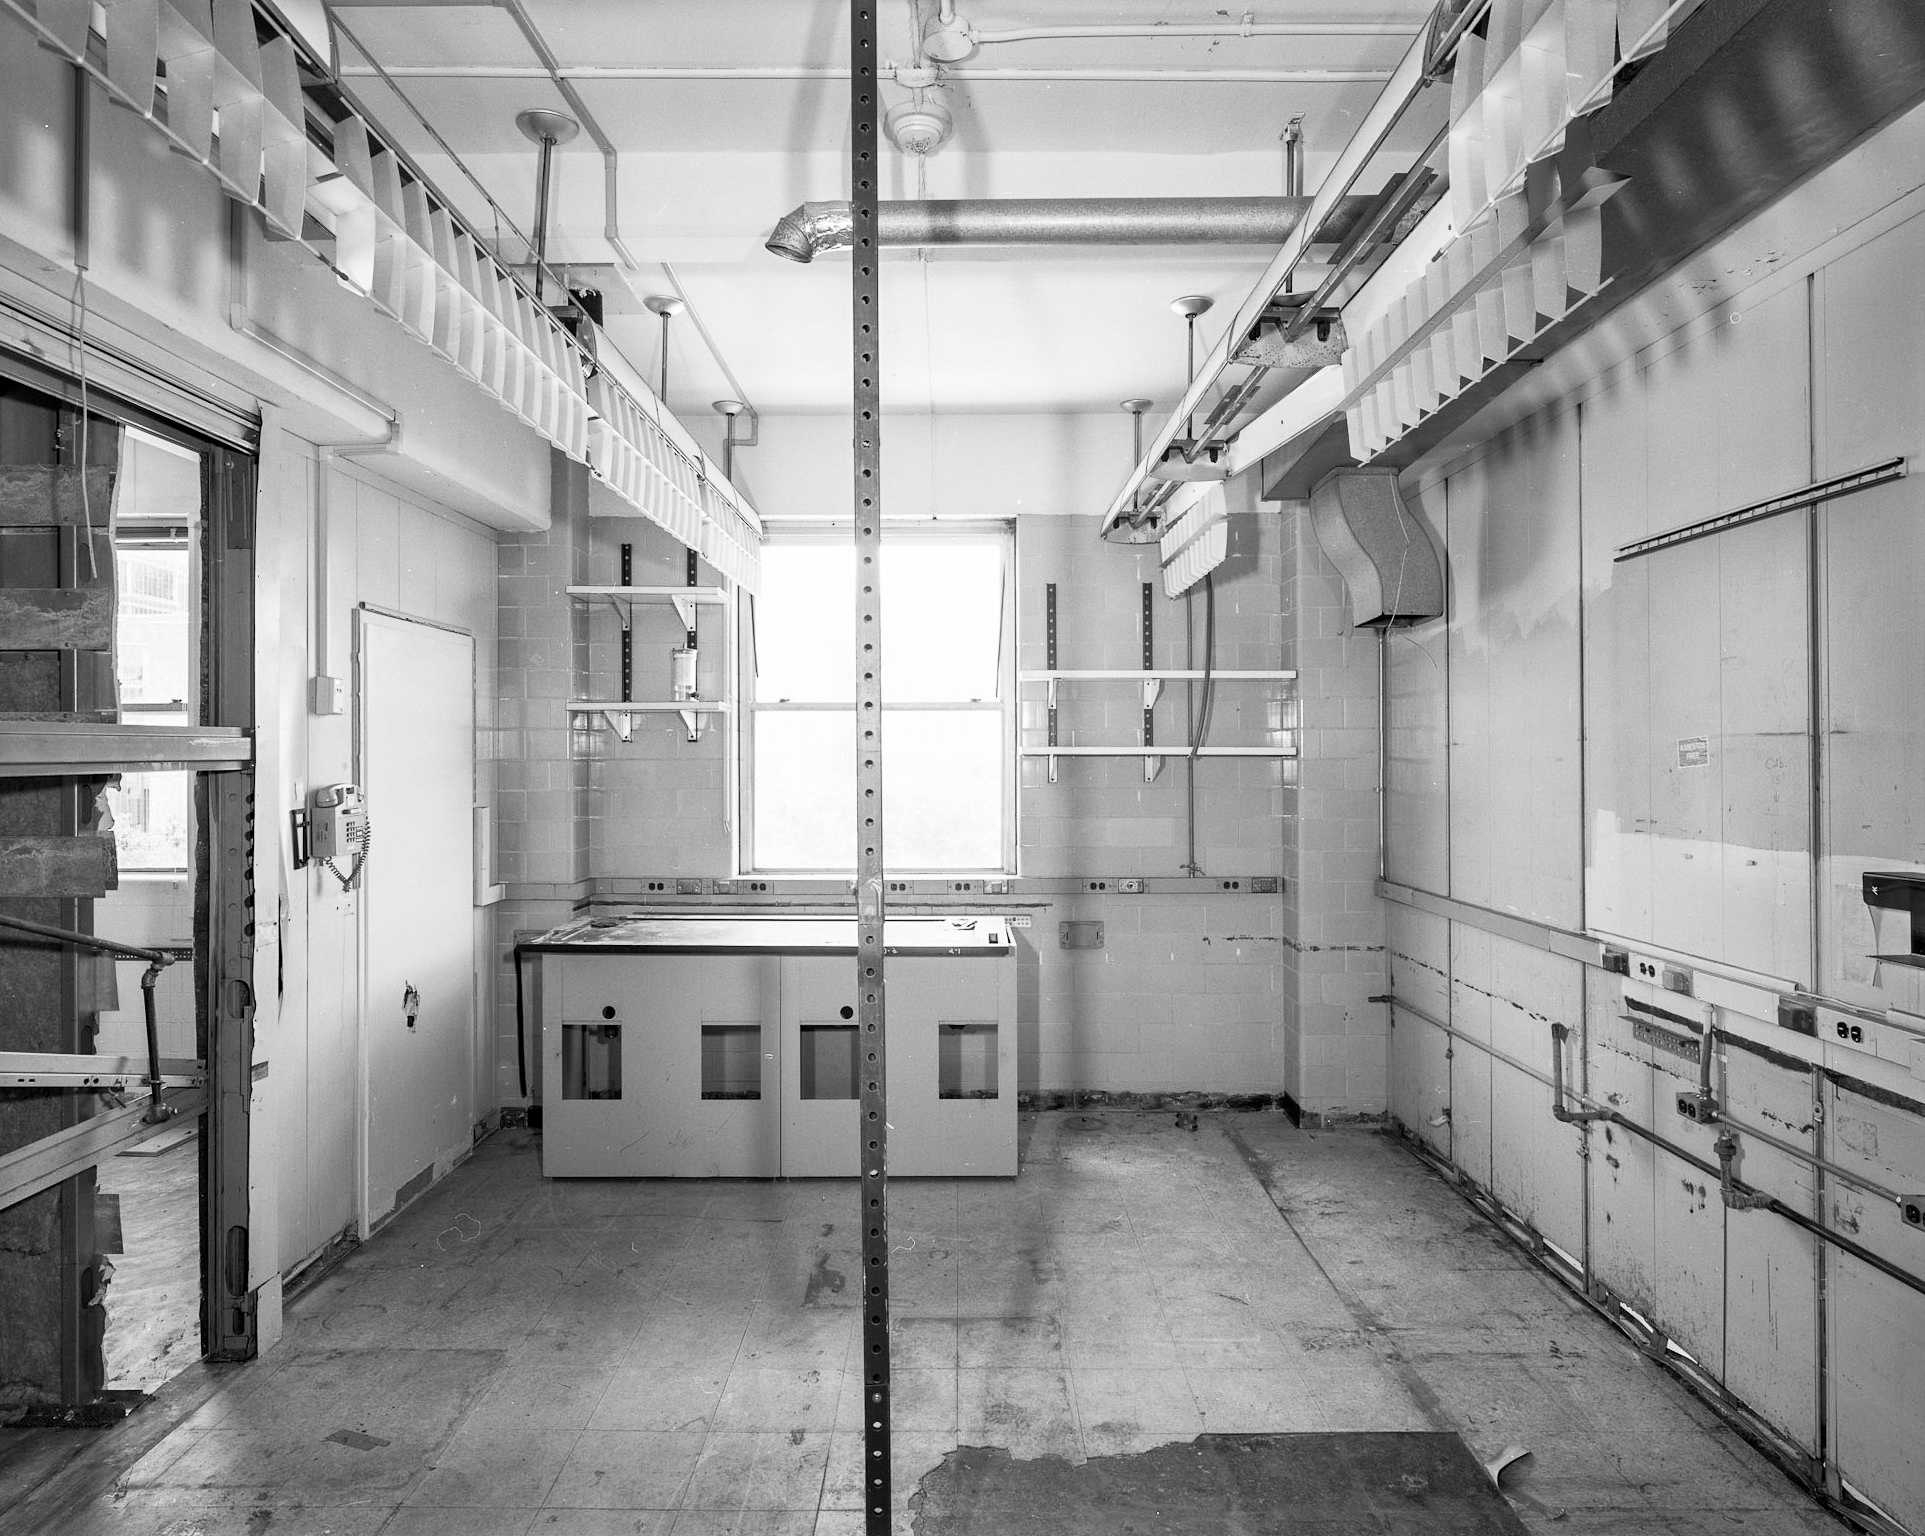 Interior black and white HABS photograph of a lab with an original wall mounted phone,the shelving and cupboards in place taken from the entrance door